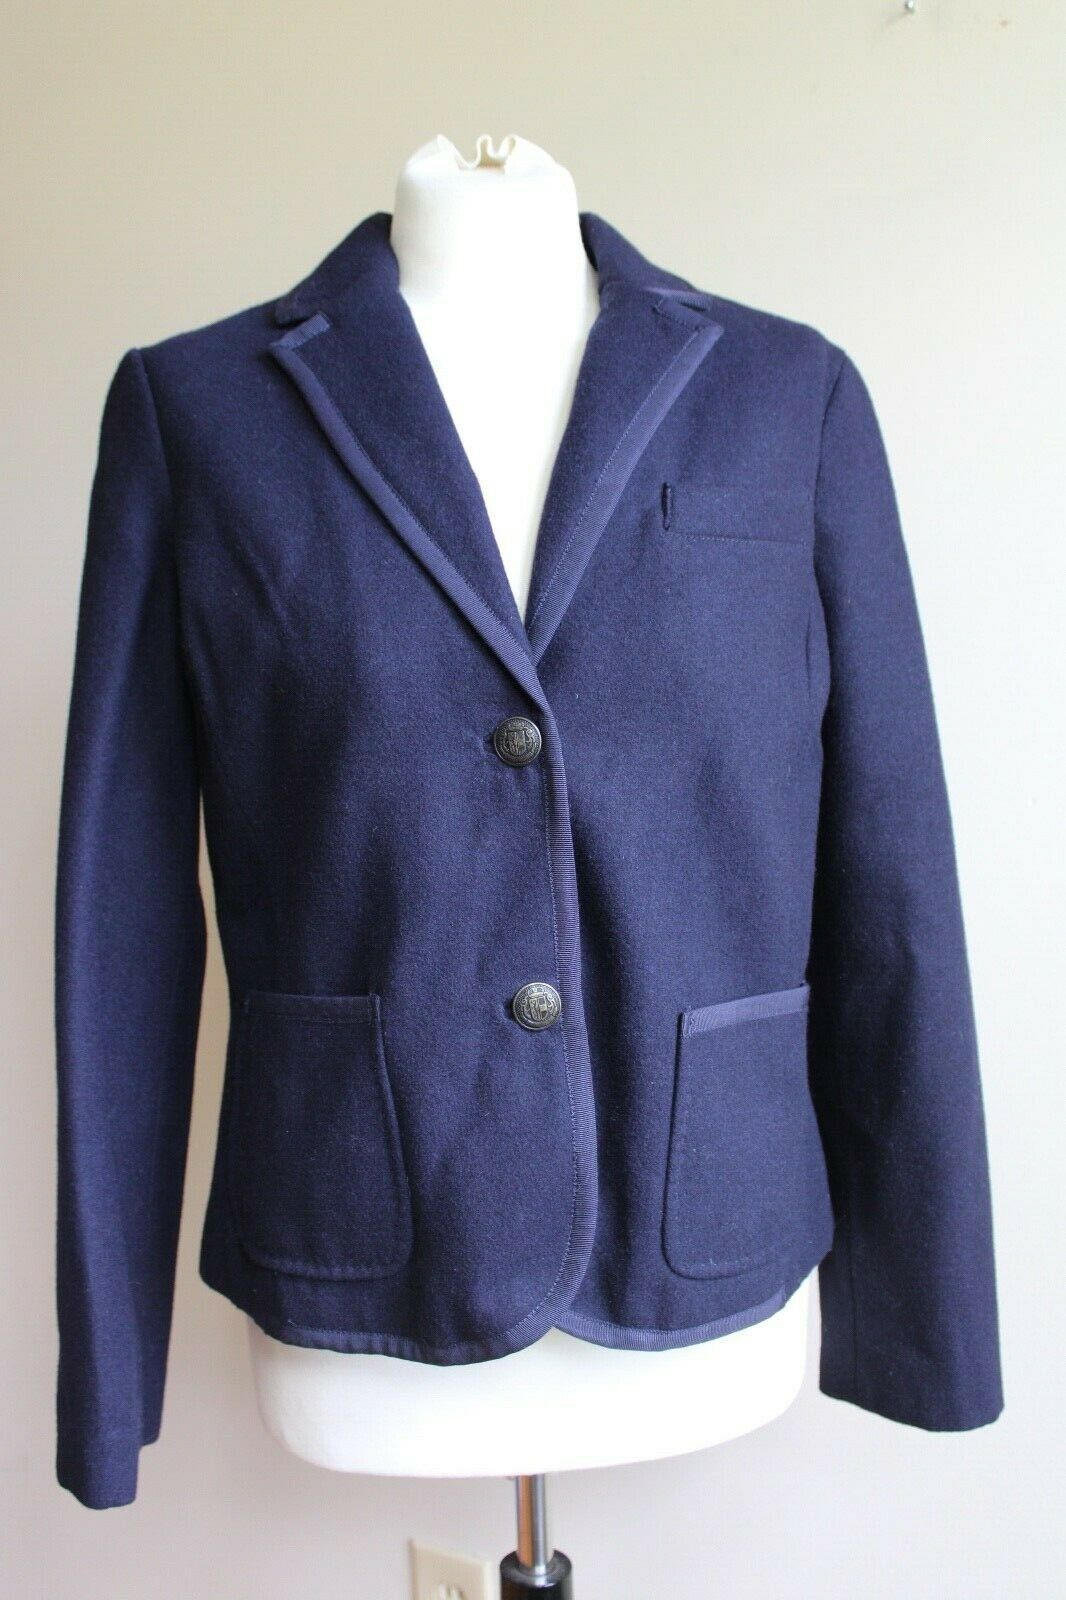 Primary image for Lands End 8P Petite Navy Blue Wool Blend Blazer Metal Button Ribbon Trim College